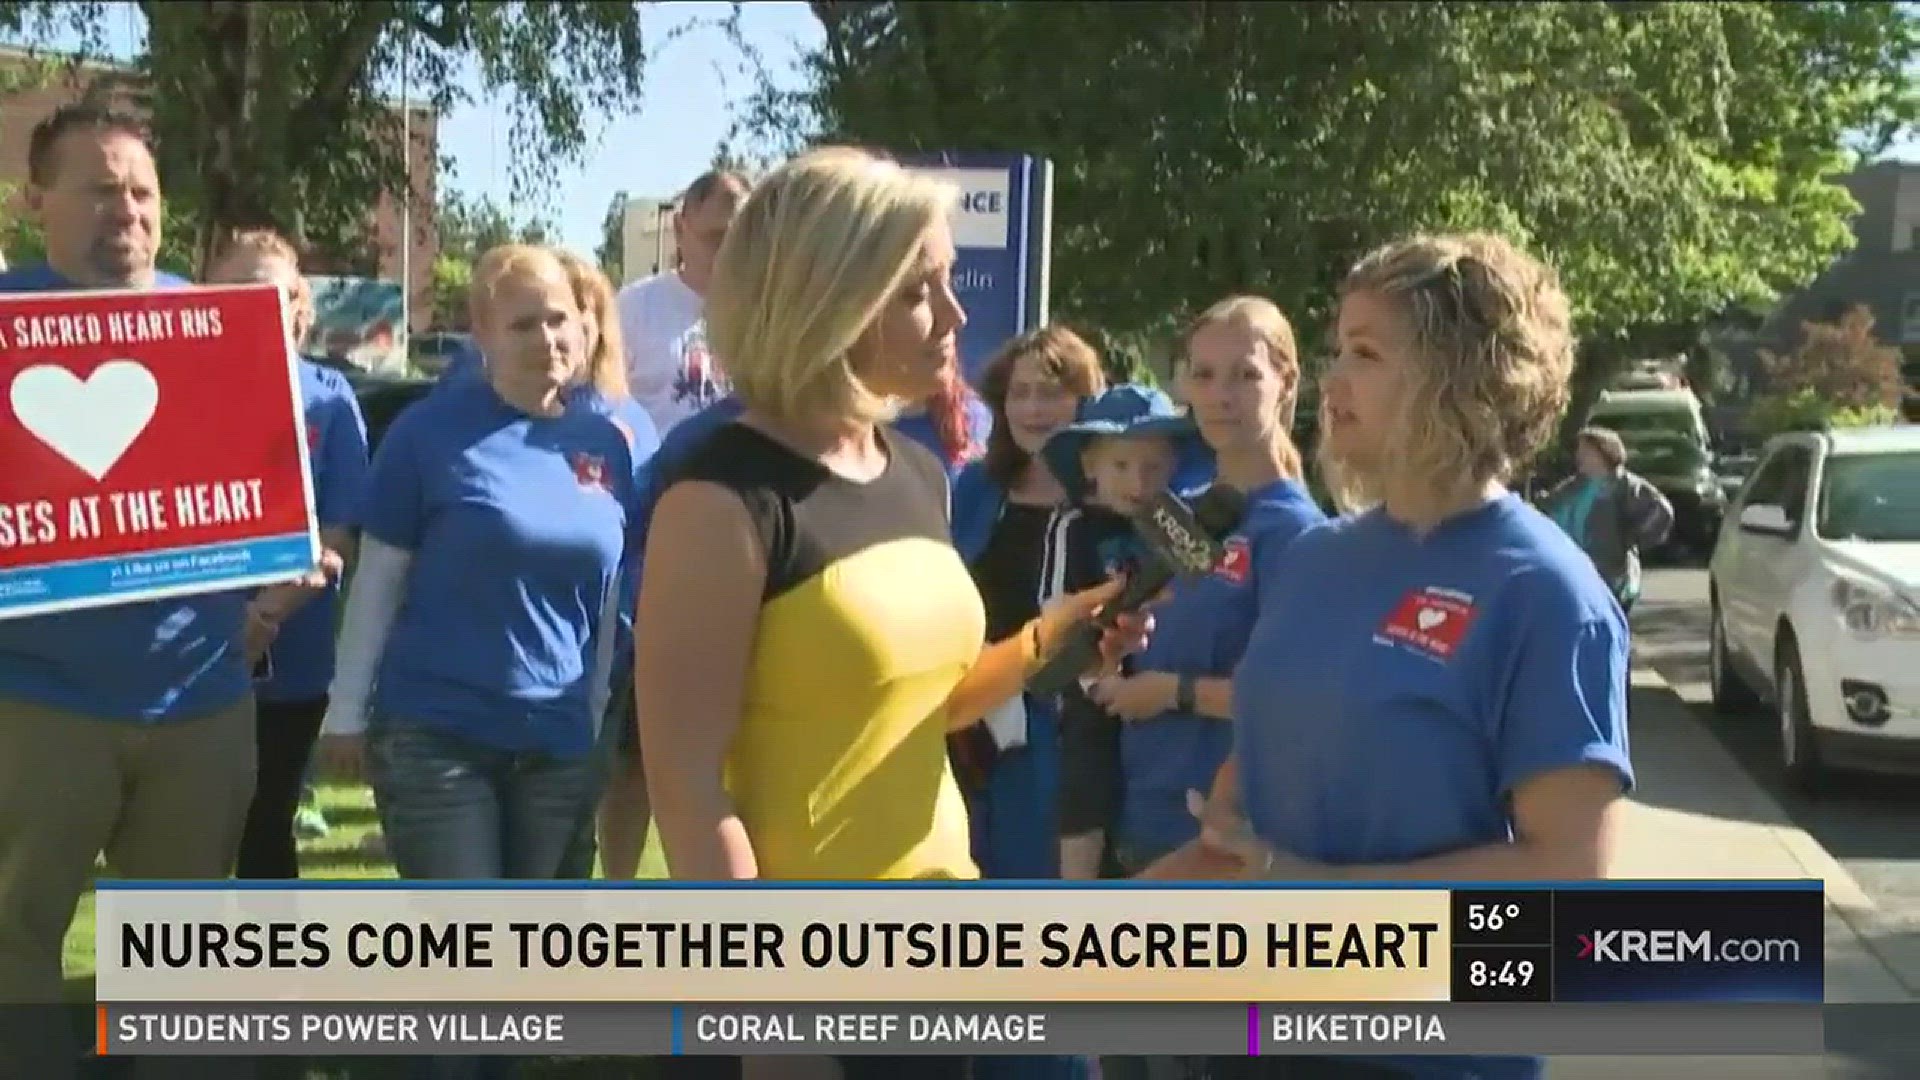 Hundreds of nurses gathered outside Sacred Heart as a sign of solidarity in their quest for safer hospital measures including staffing and benefits.